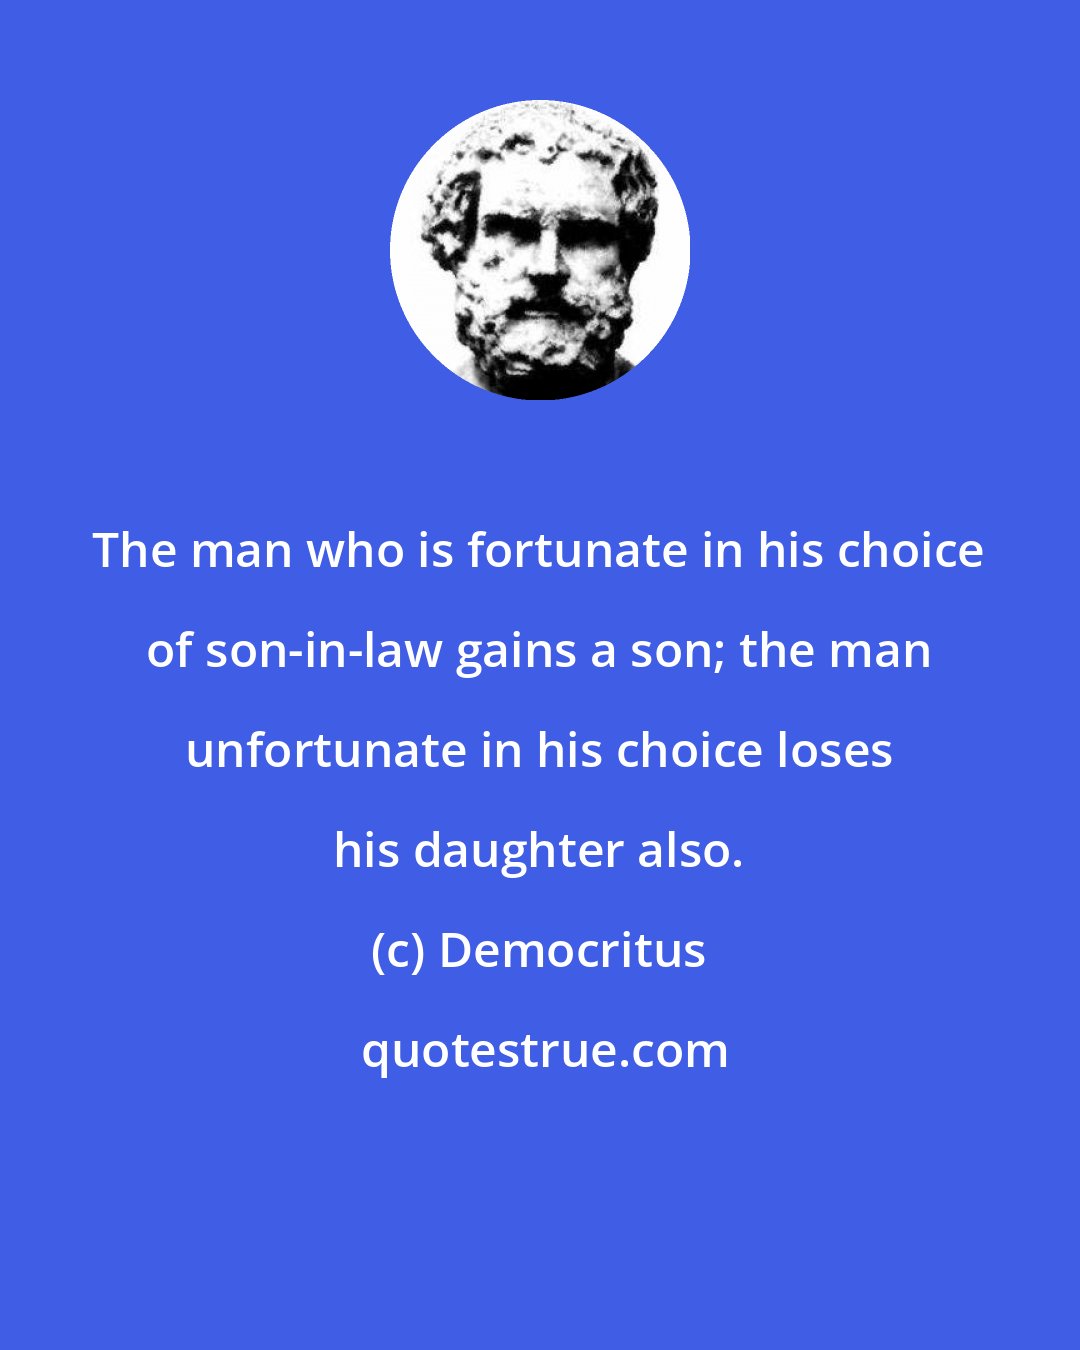 Democritus: The man who is fortunate in his choice of son-in-law gains a son; the man unfortunate in his choice loses his daughter also.